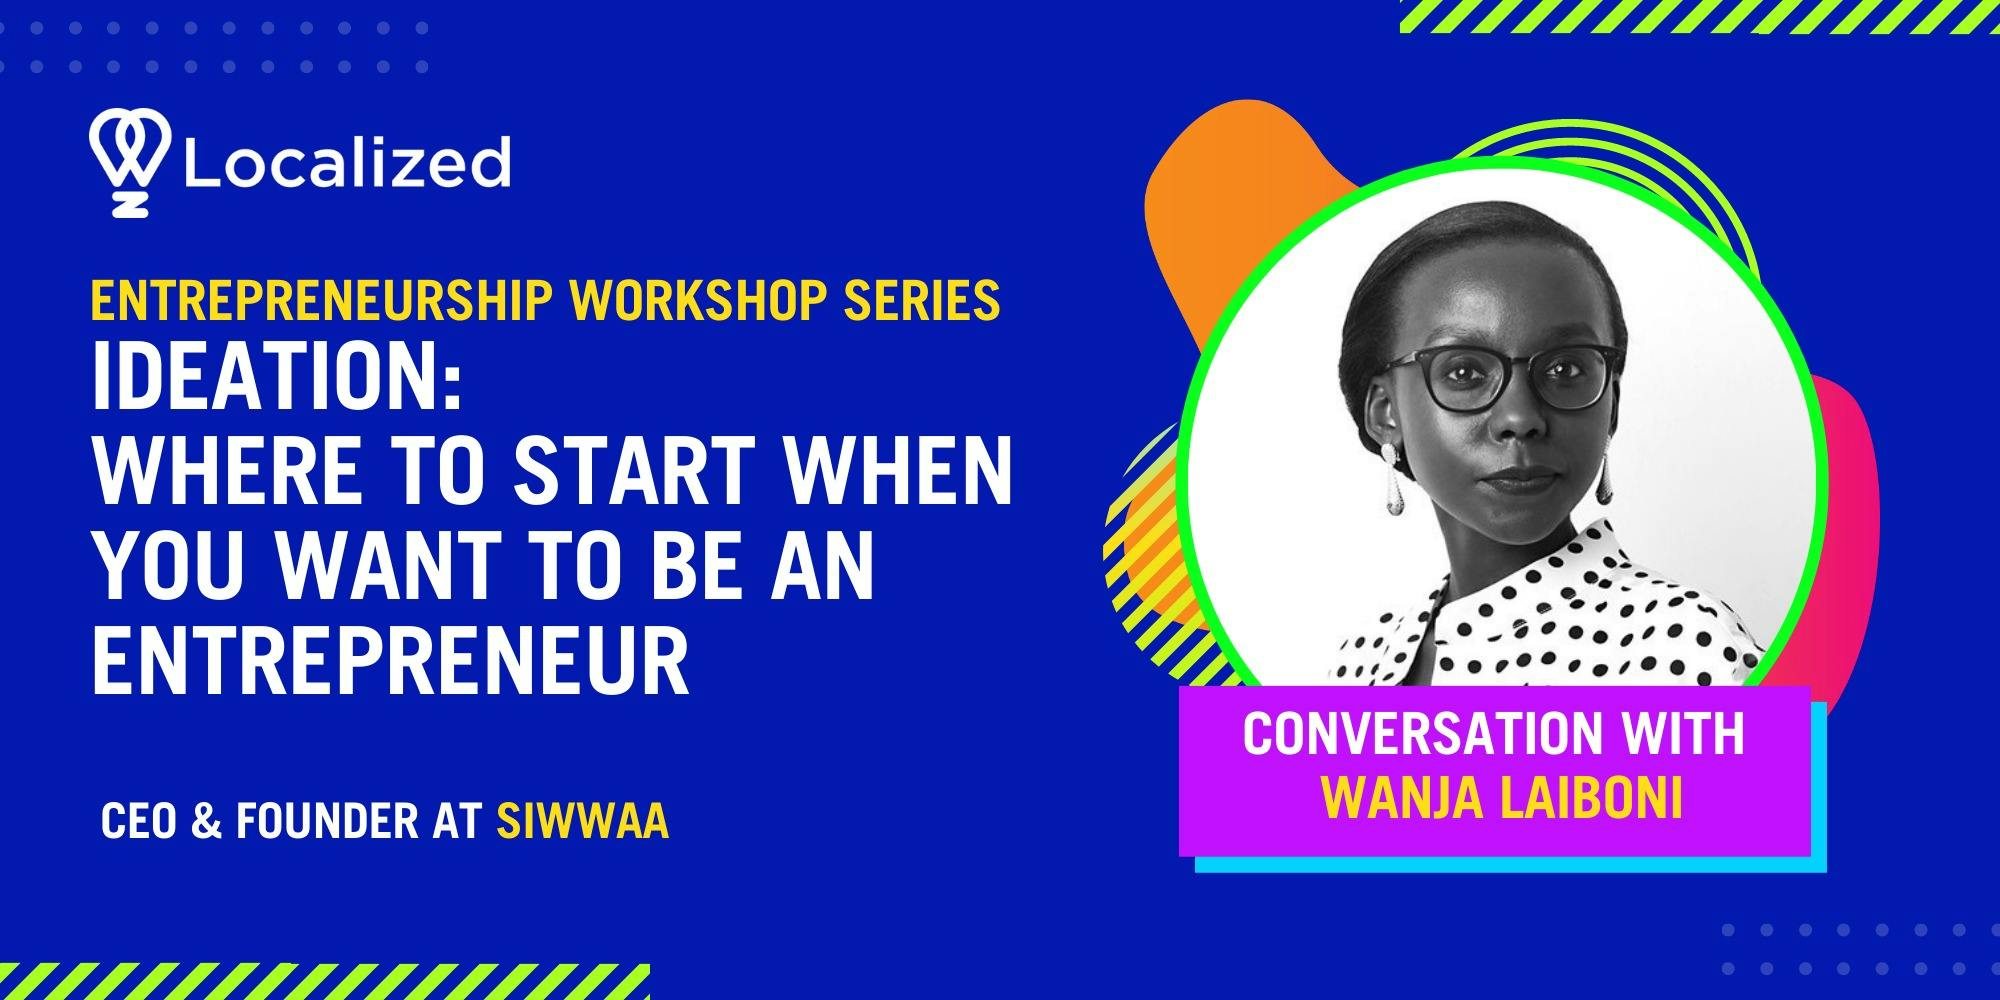 Entrepreneurship Workshop Series - Ideation: Where To Start When You Want To Be An Entrepreneur